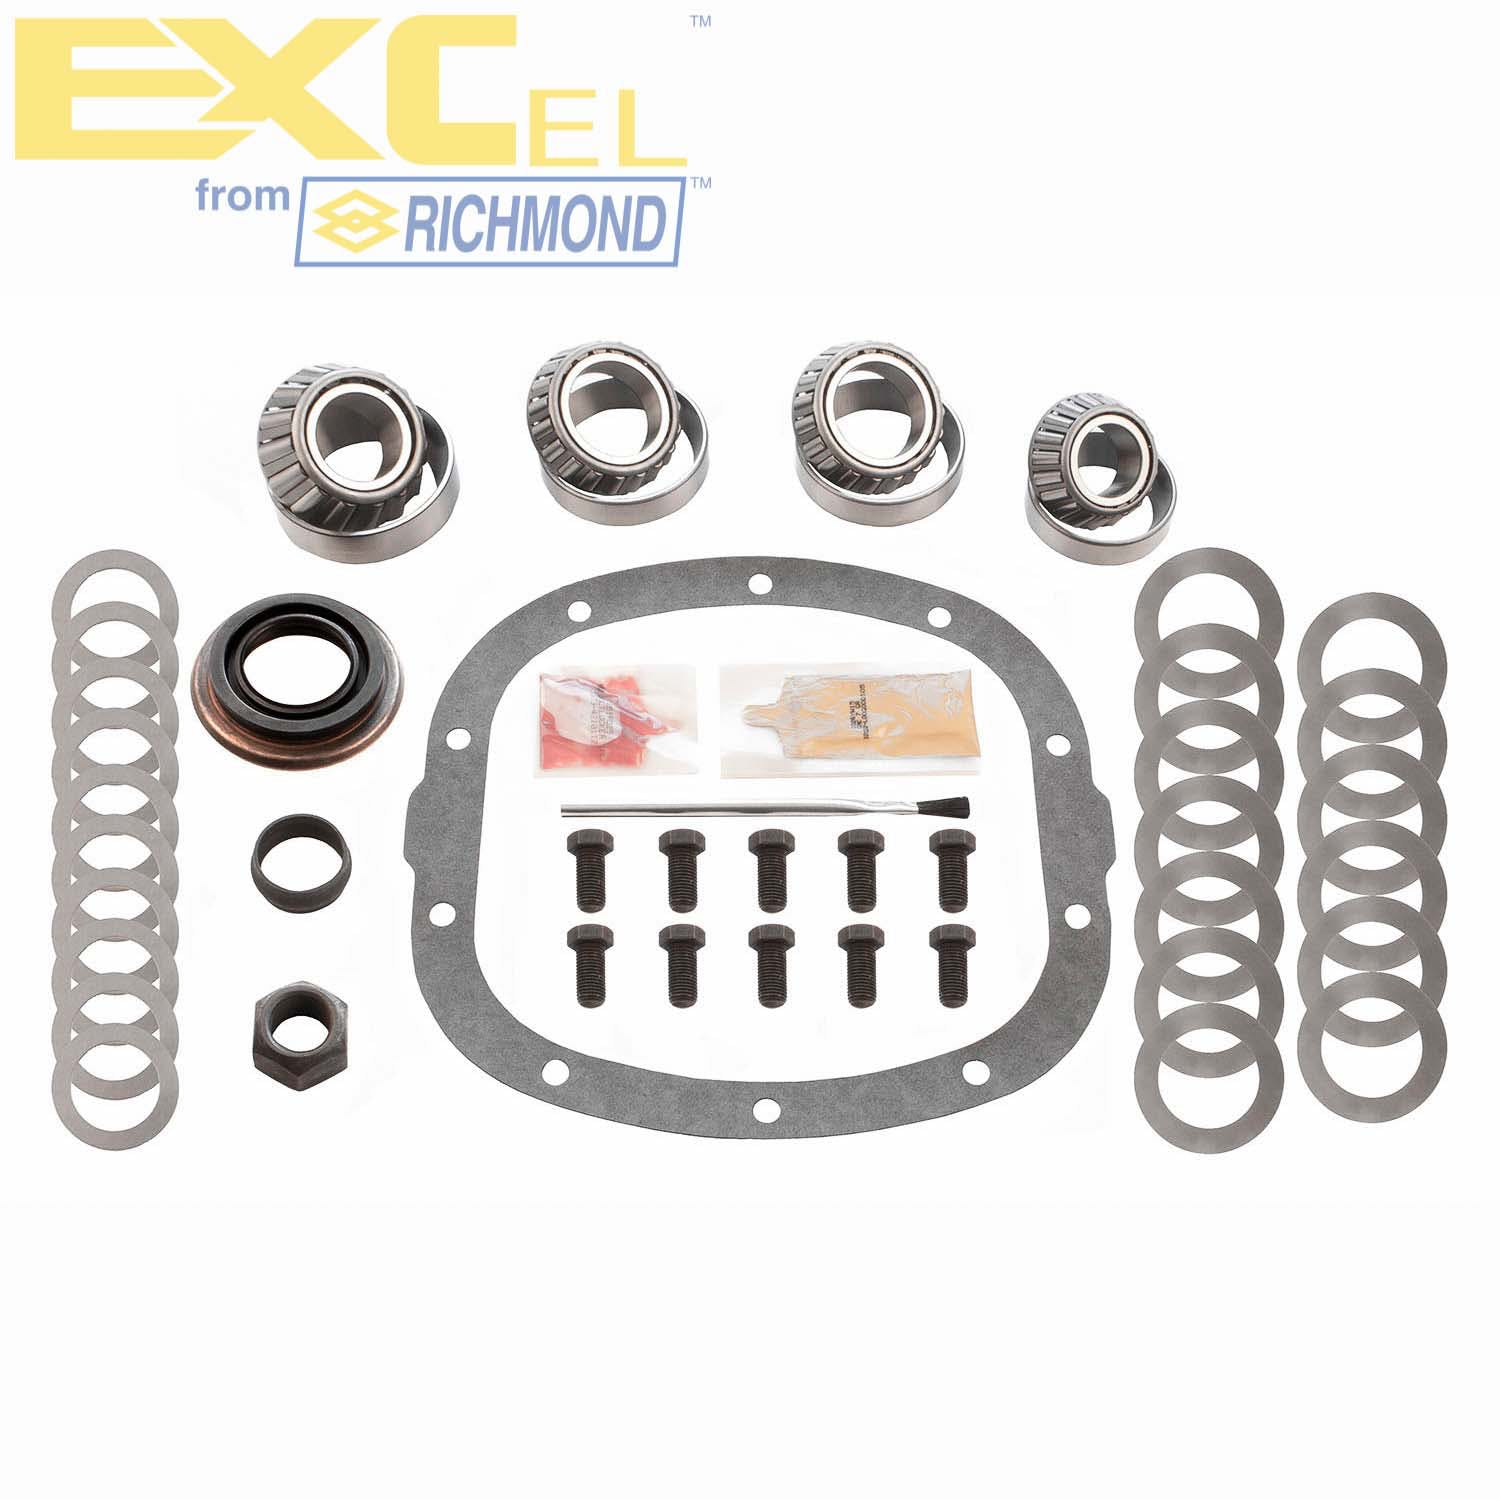 Excel XL-1083-1 Differential Bearing Kit